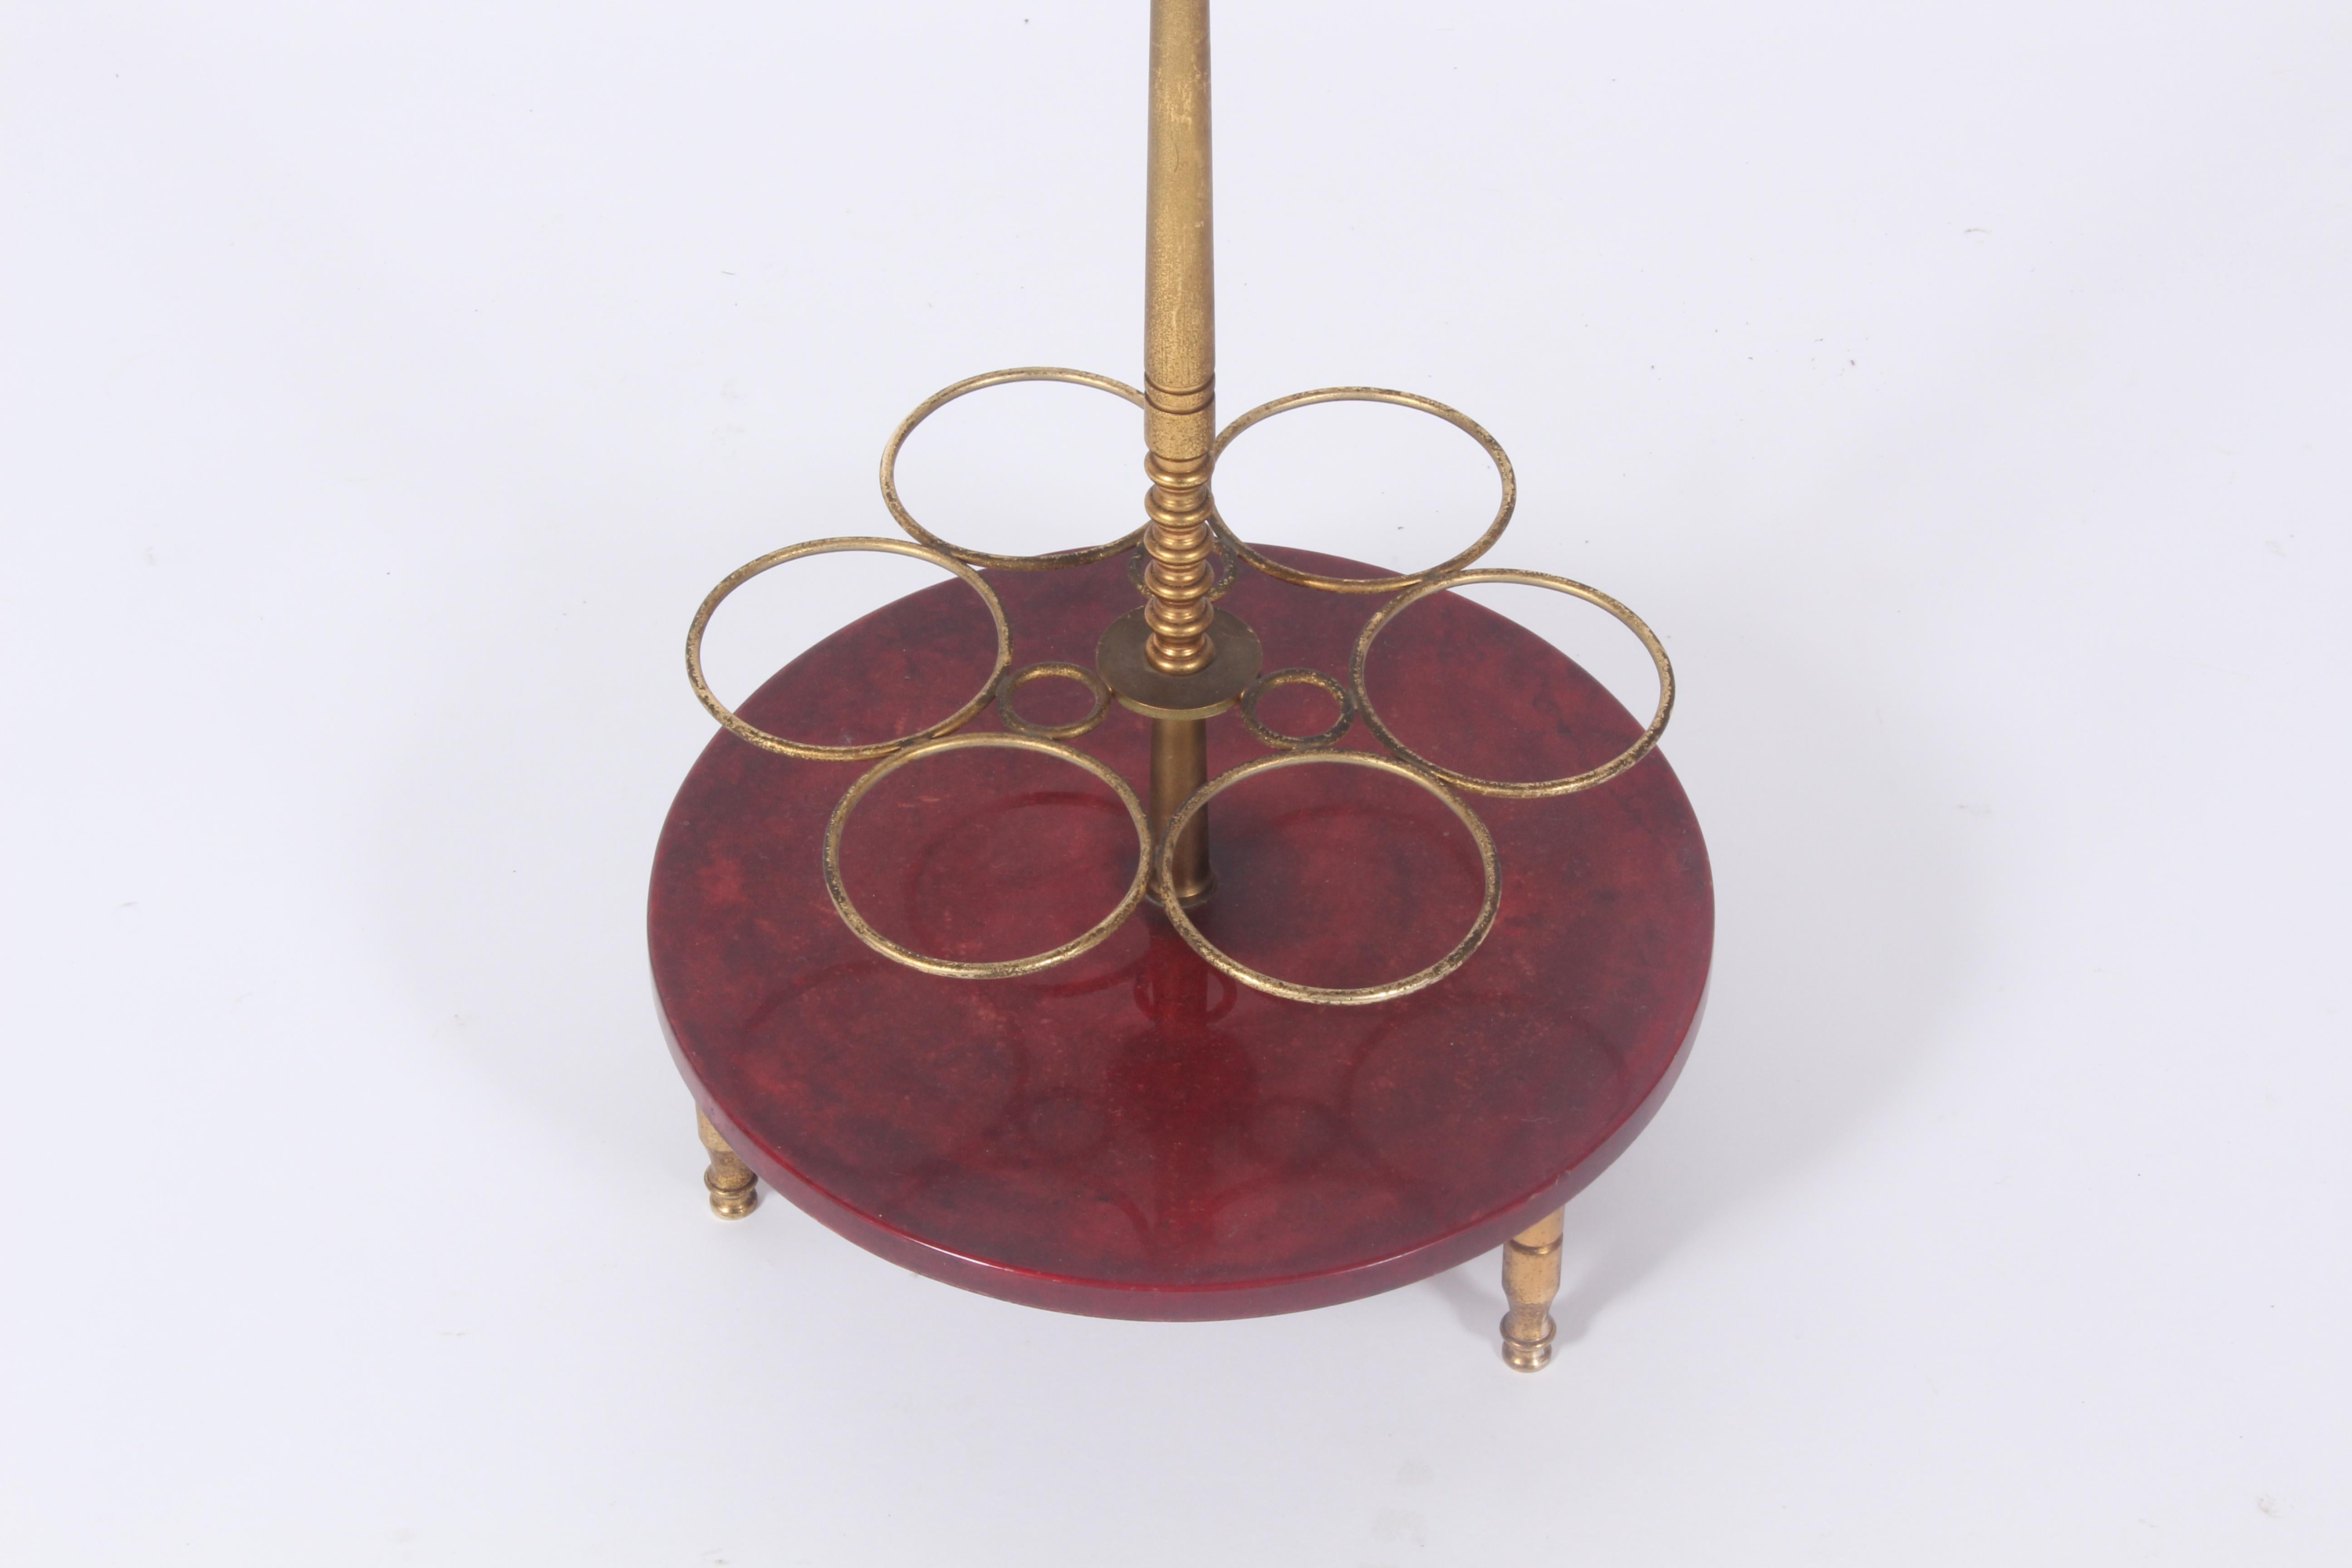 A fabulous bottle stand / centerpiece by the renowned Italian designer in brass wood and red parchment. In very good condition with some wonderful patina gained on the brass surfaces over the years. Bearing the original makers label to the